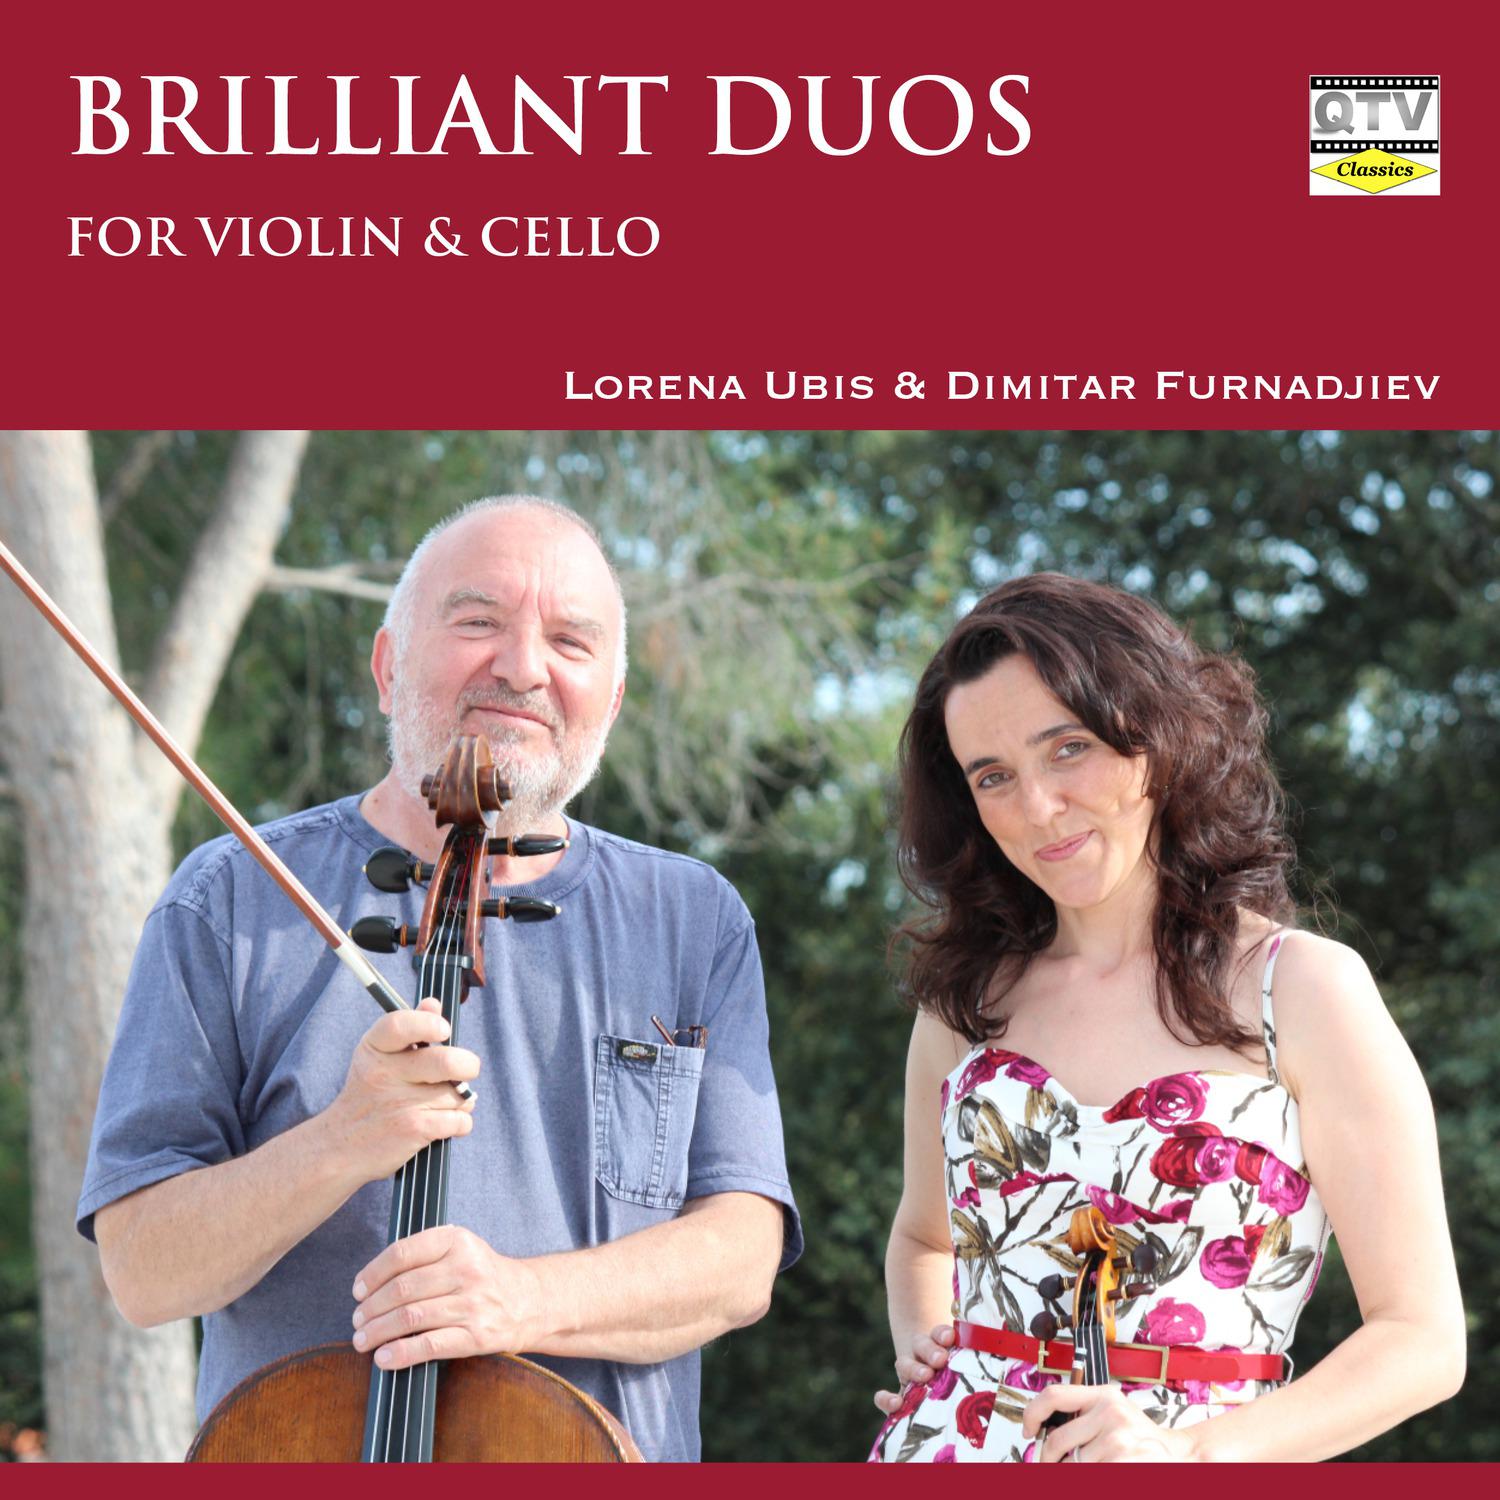 Duets for Violin and Cello, Op. 63, No. 3: I. Allegro